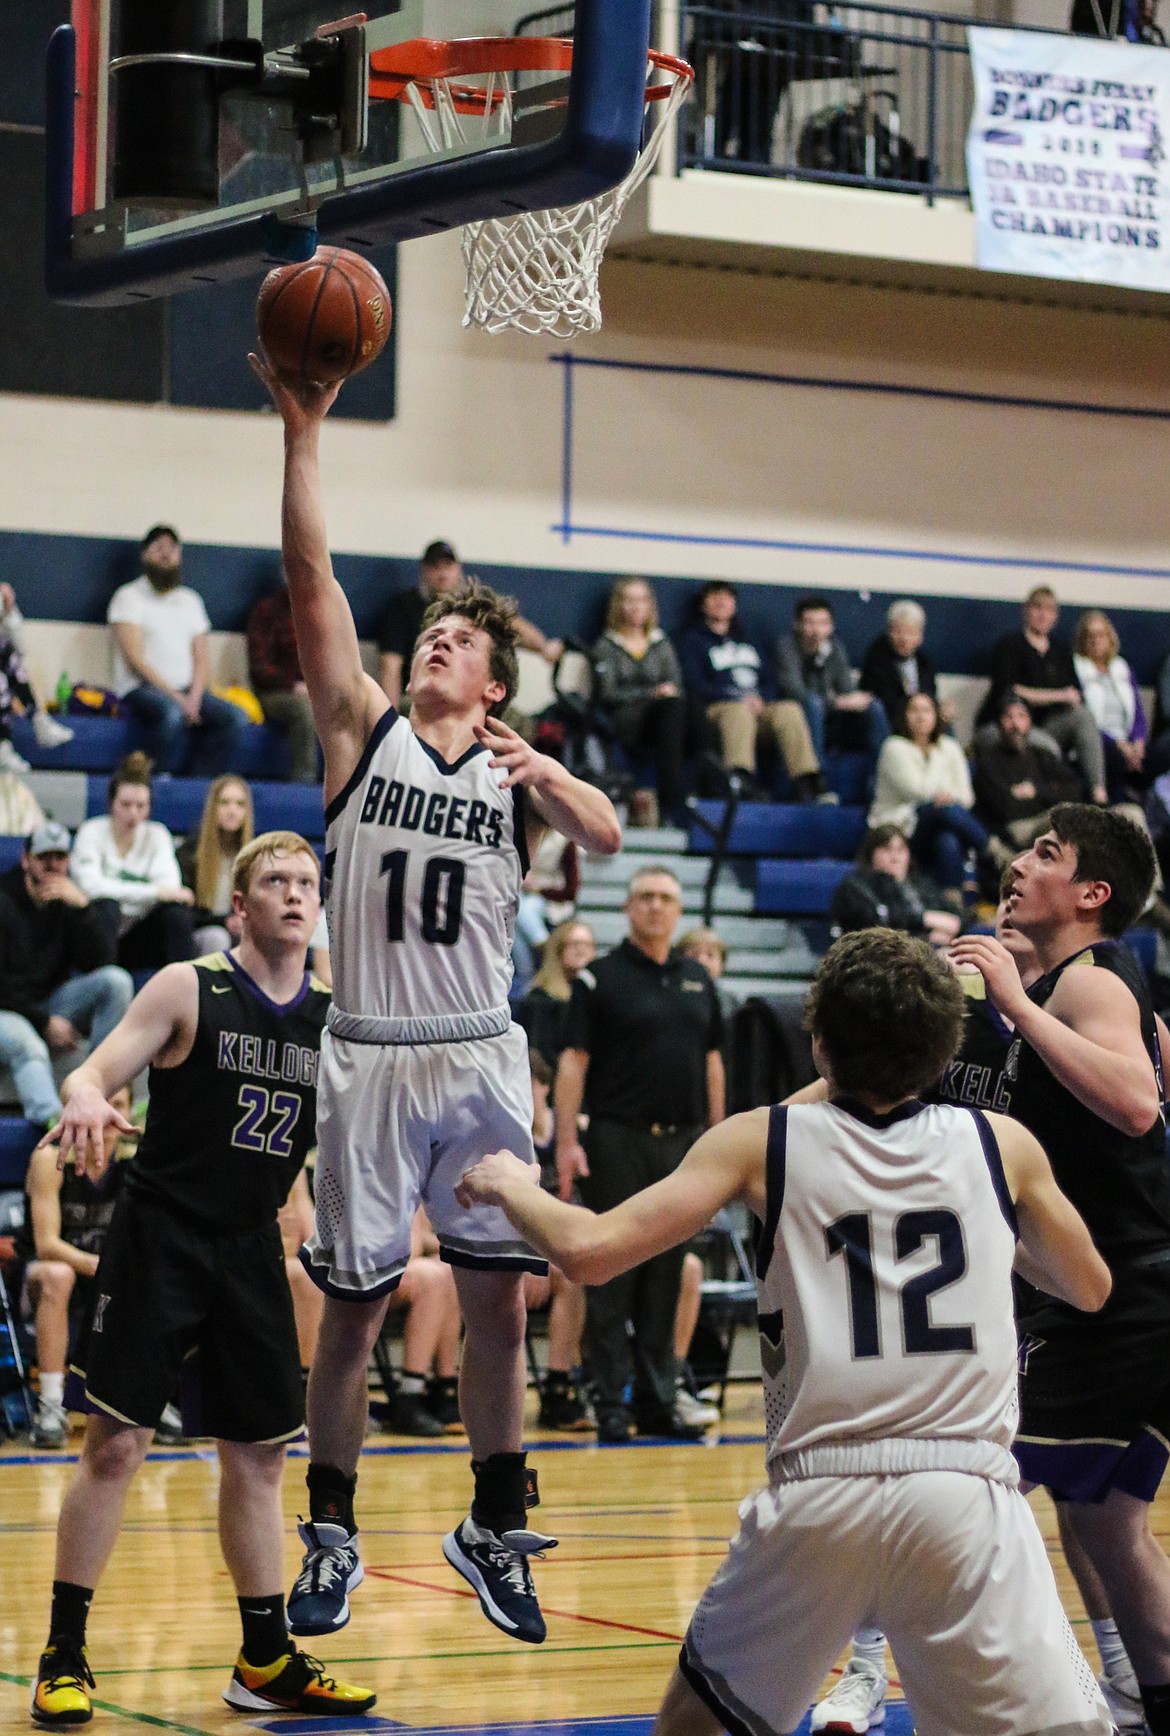 Left: Ty Bateman drives to the basket during last Thursday’s game against Kellogg. The visiting Wildcats won 73-55.
Right: Matt Morgan leaps over Wildcat defenders.